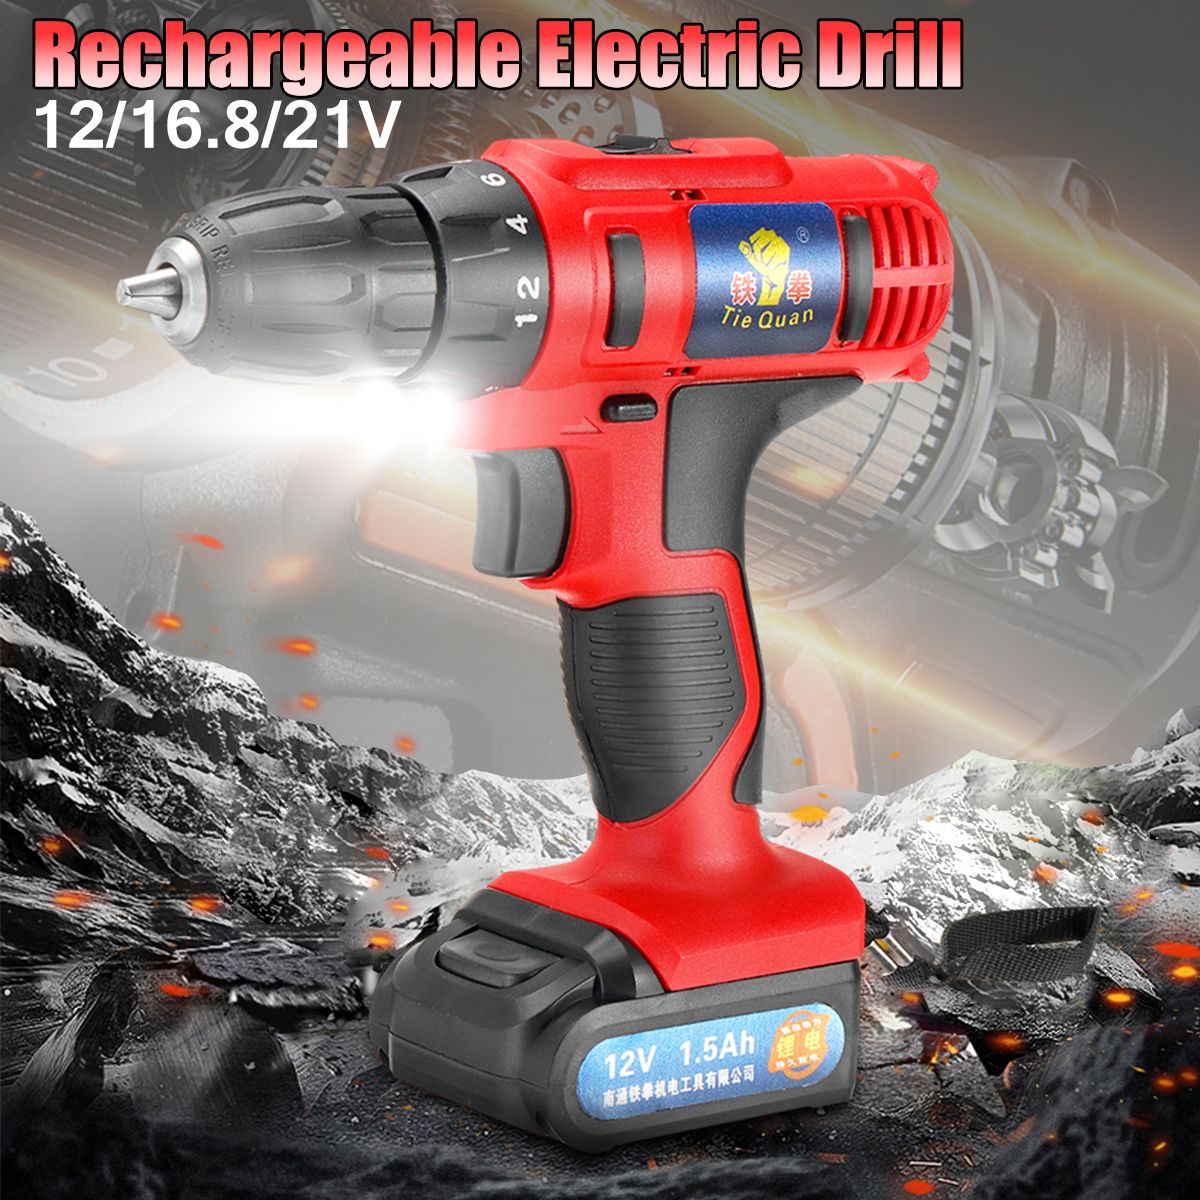 21V168V12V-LED-Cordless-Electric-Drill-Screwdriver-Driver-With-1-or-2-Li-ion-Battery-1451159